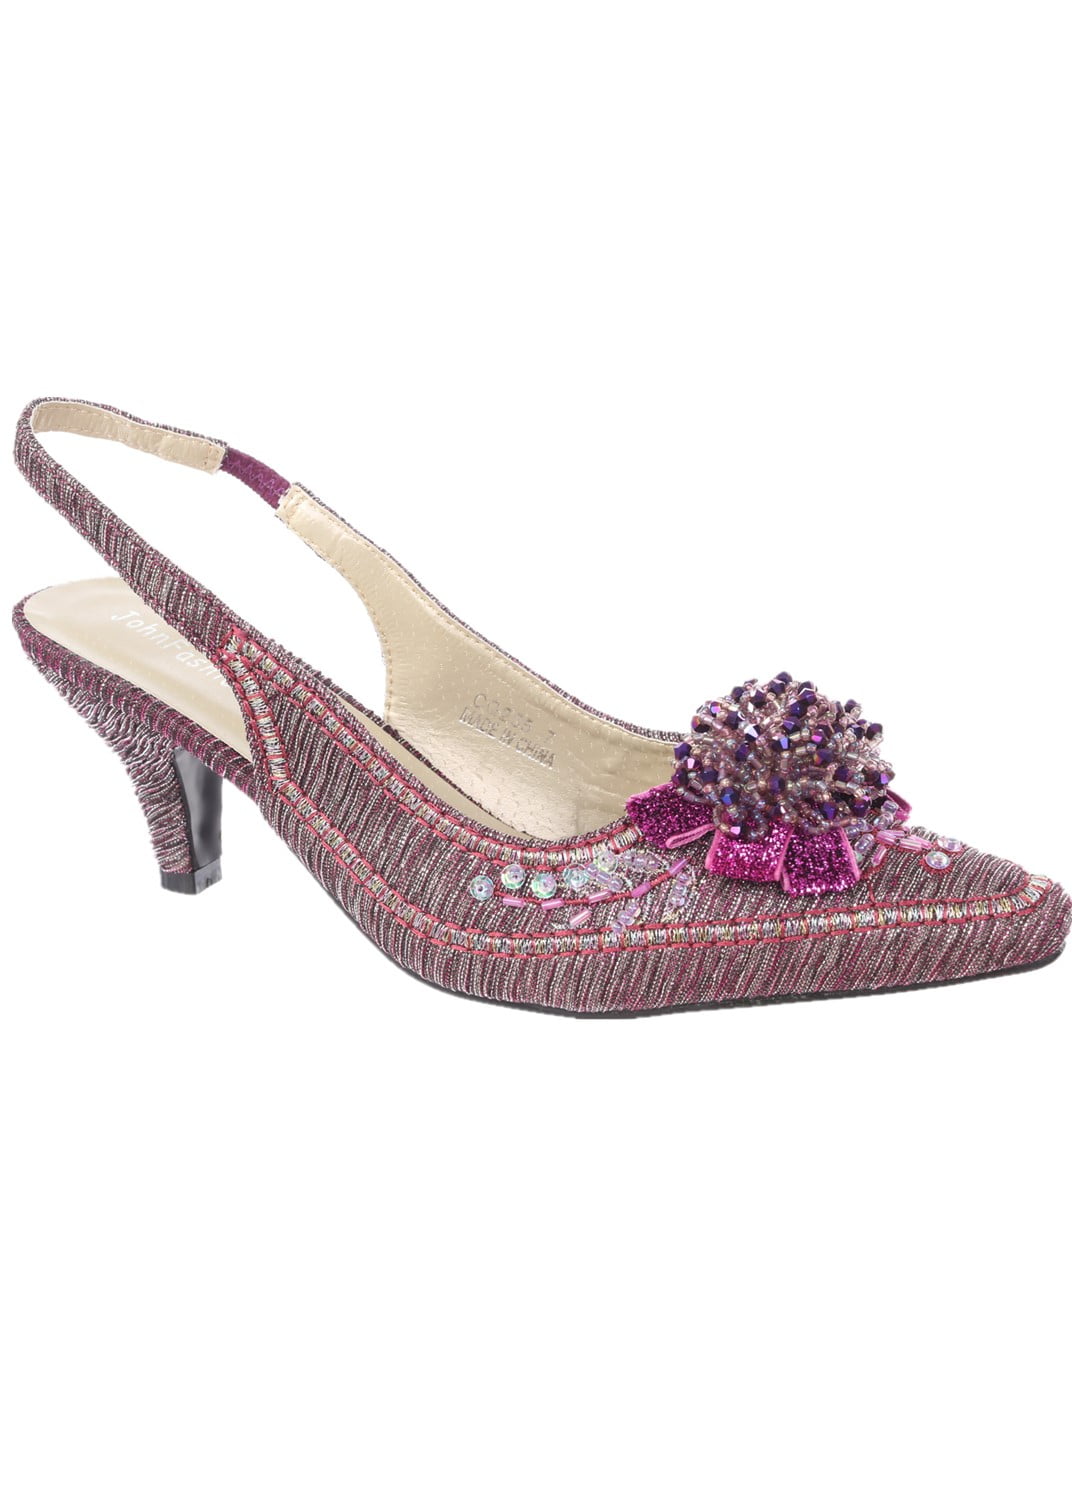 Buy > purple sling back shoes > in stock